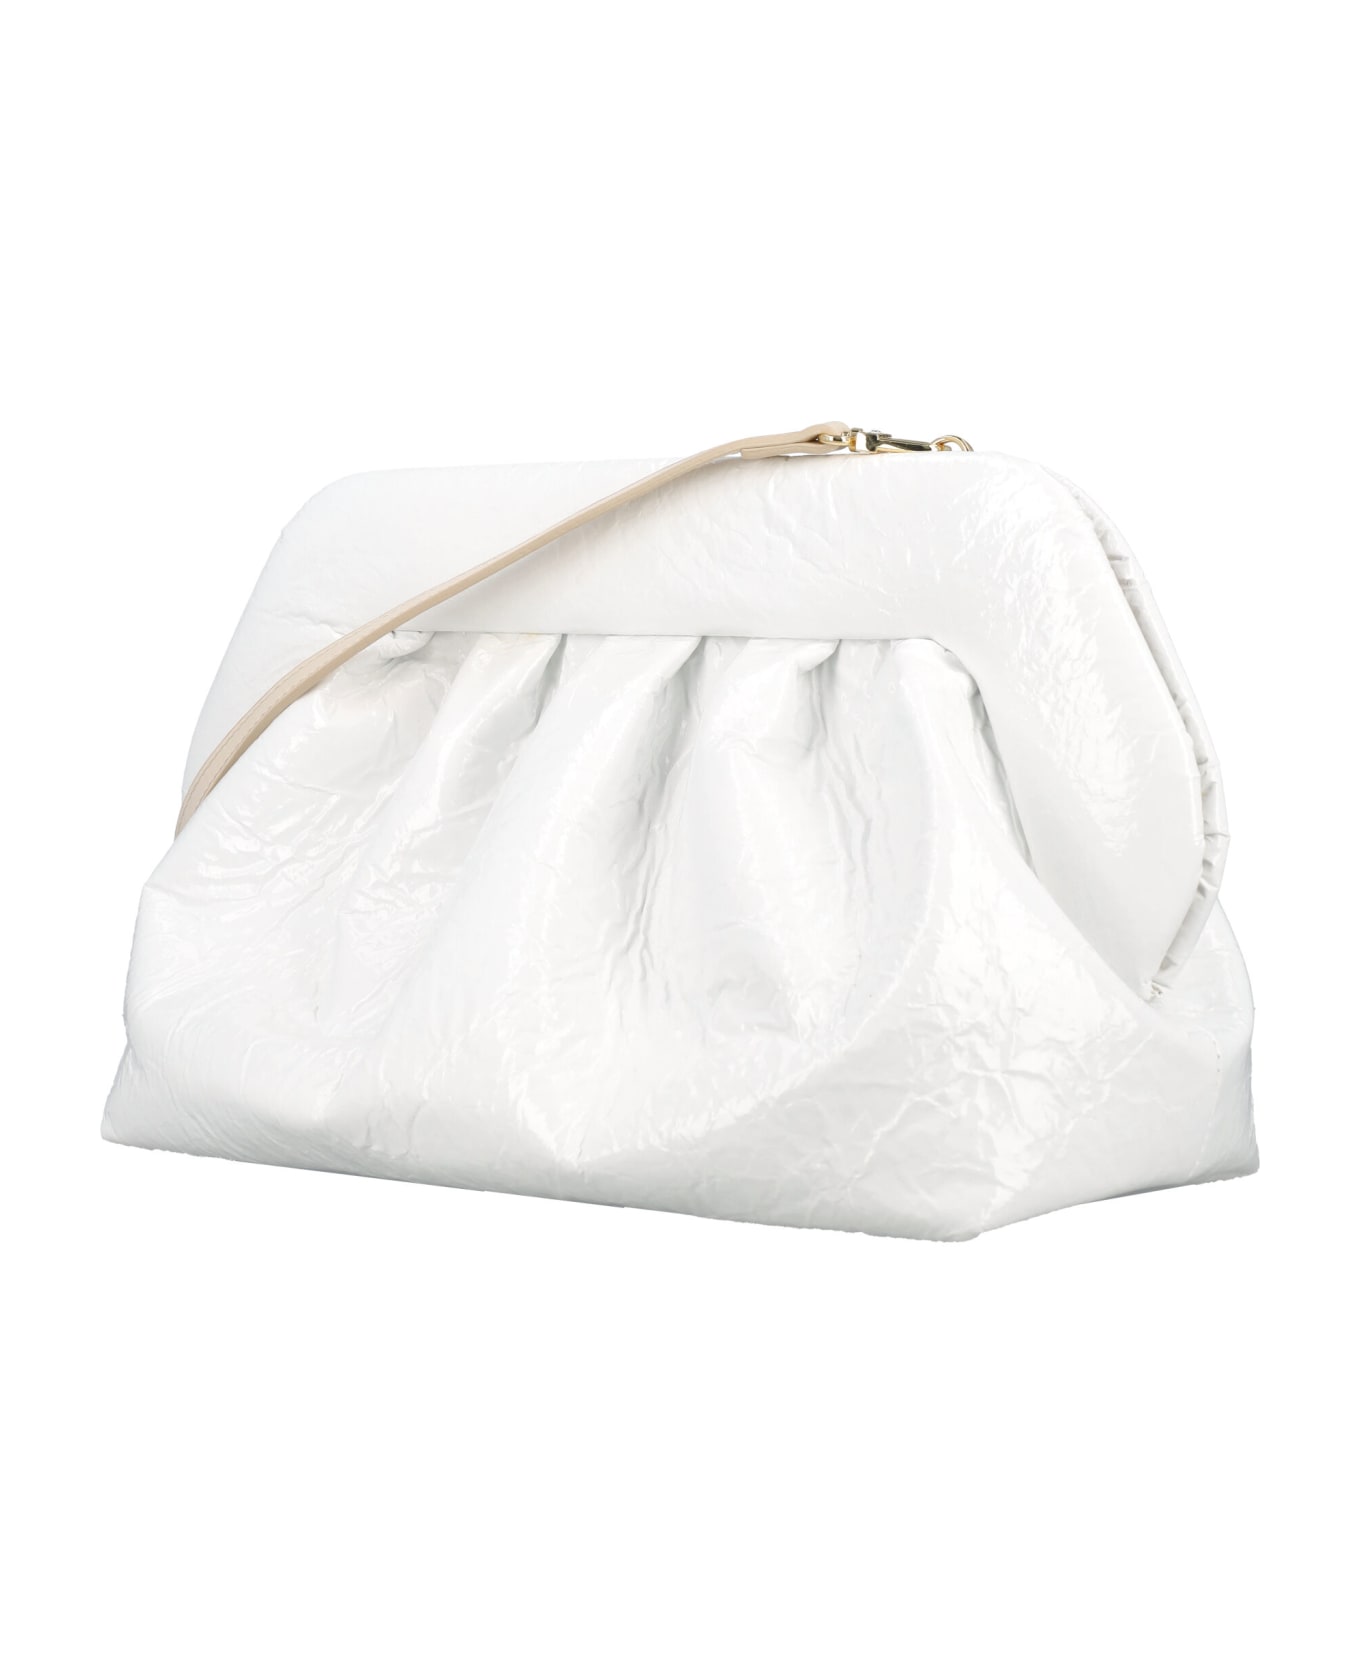 THEMOIRè Bios Clutch Pineapple Leather - SHELL IVORY クラッチバッグ